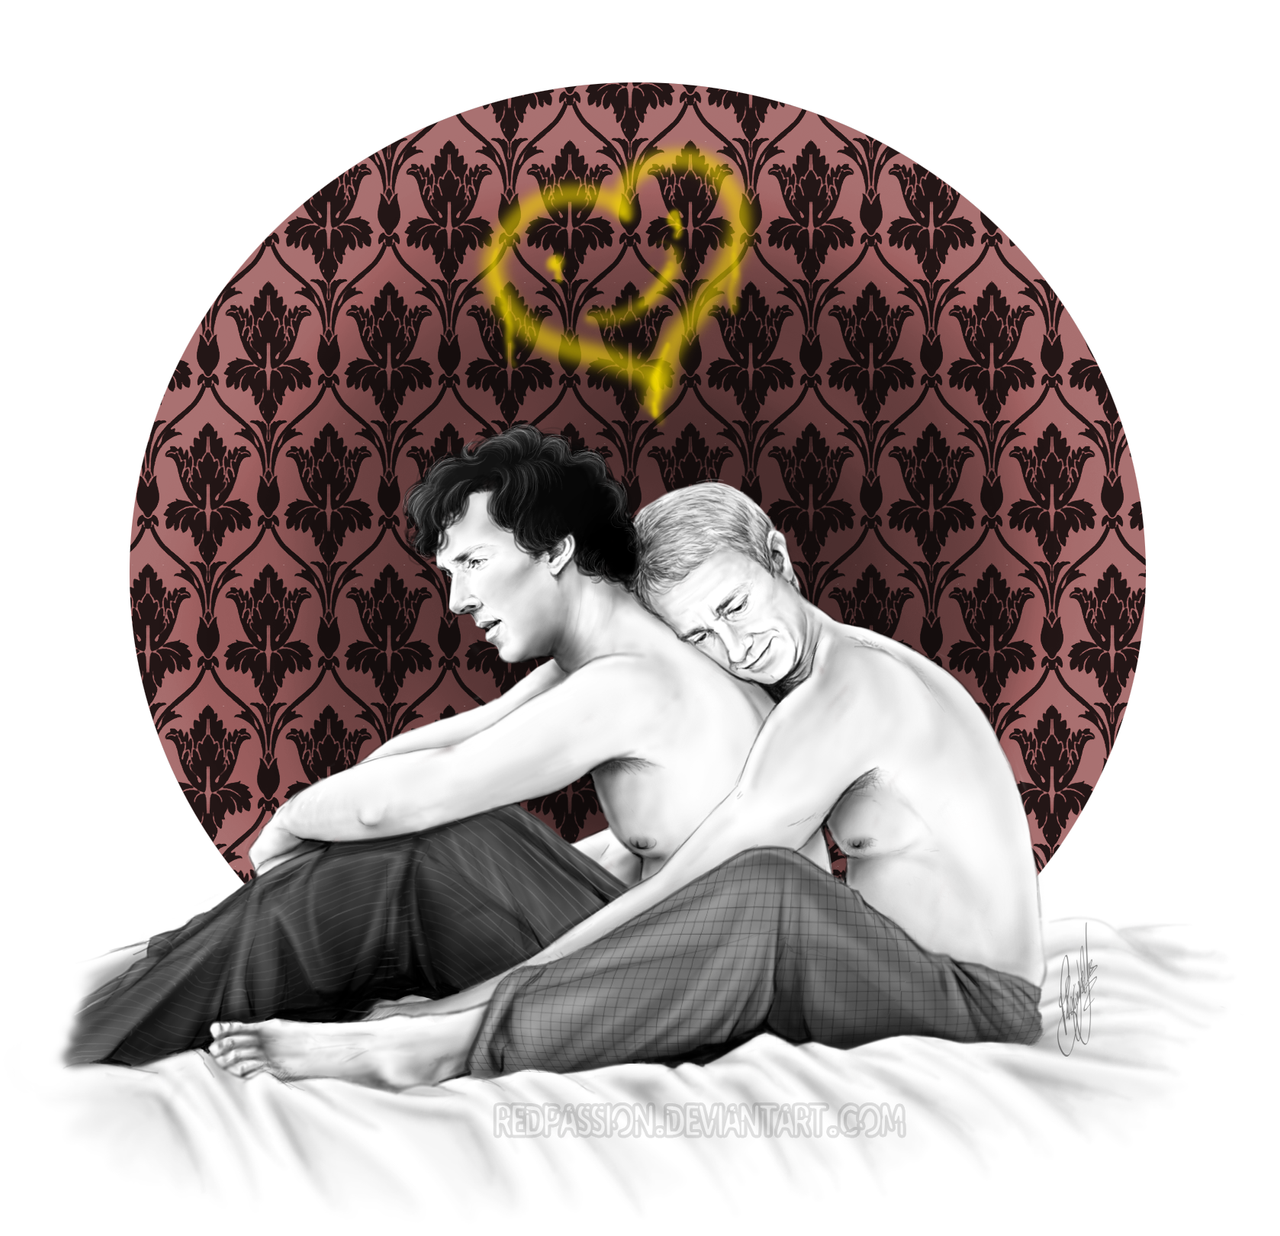 http://fc01.deviantart.net/fs71/i/2013/156/2/f/johnlock___snuggling_thoughts_by_redpassion-d67xf87.png